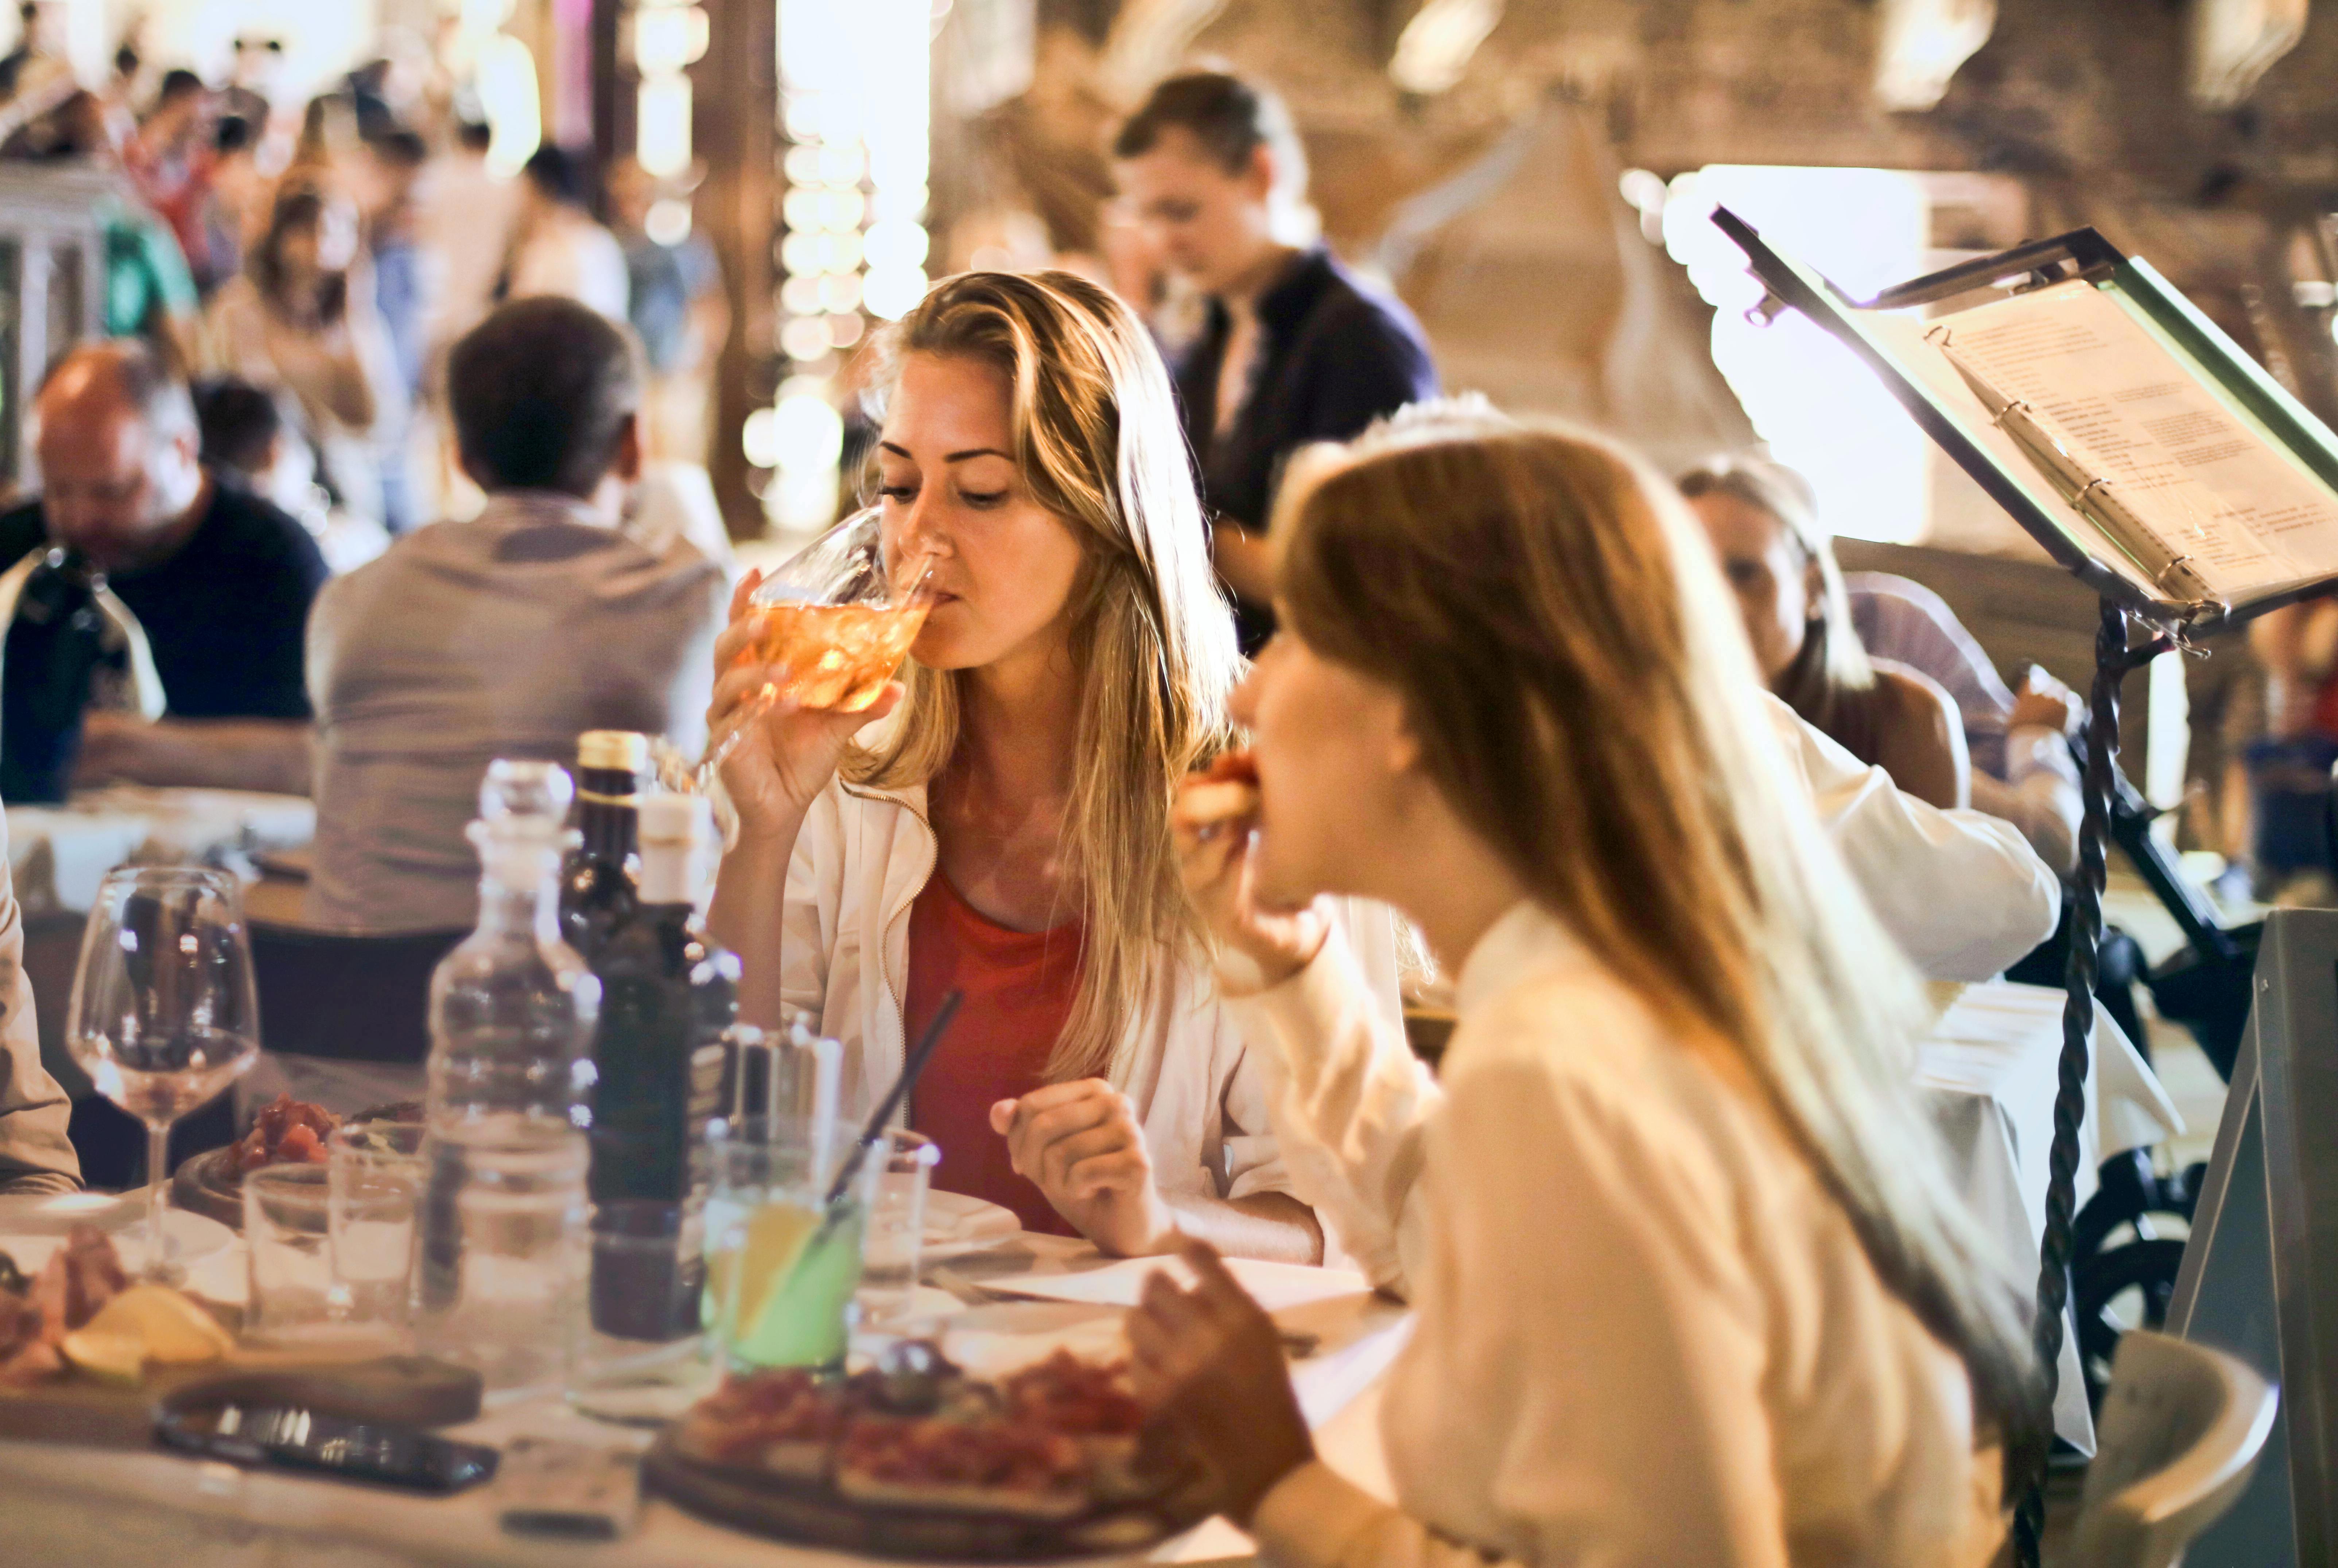 Stock image of two women eating and drinking wine.